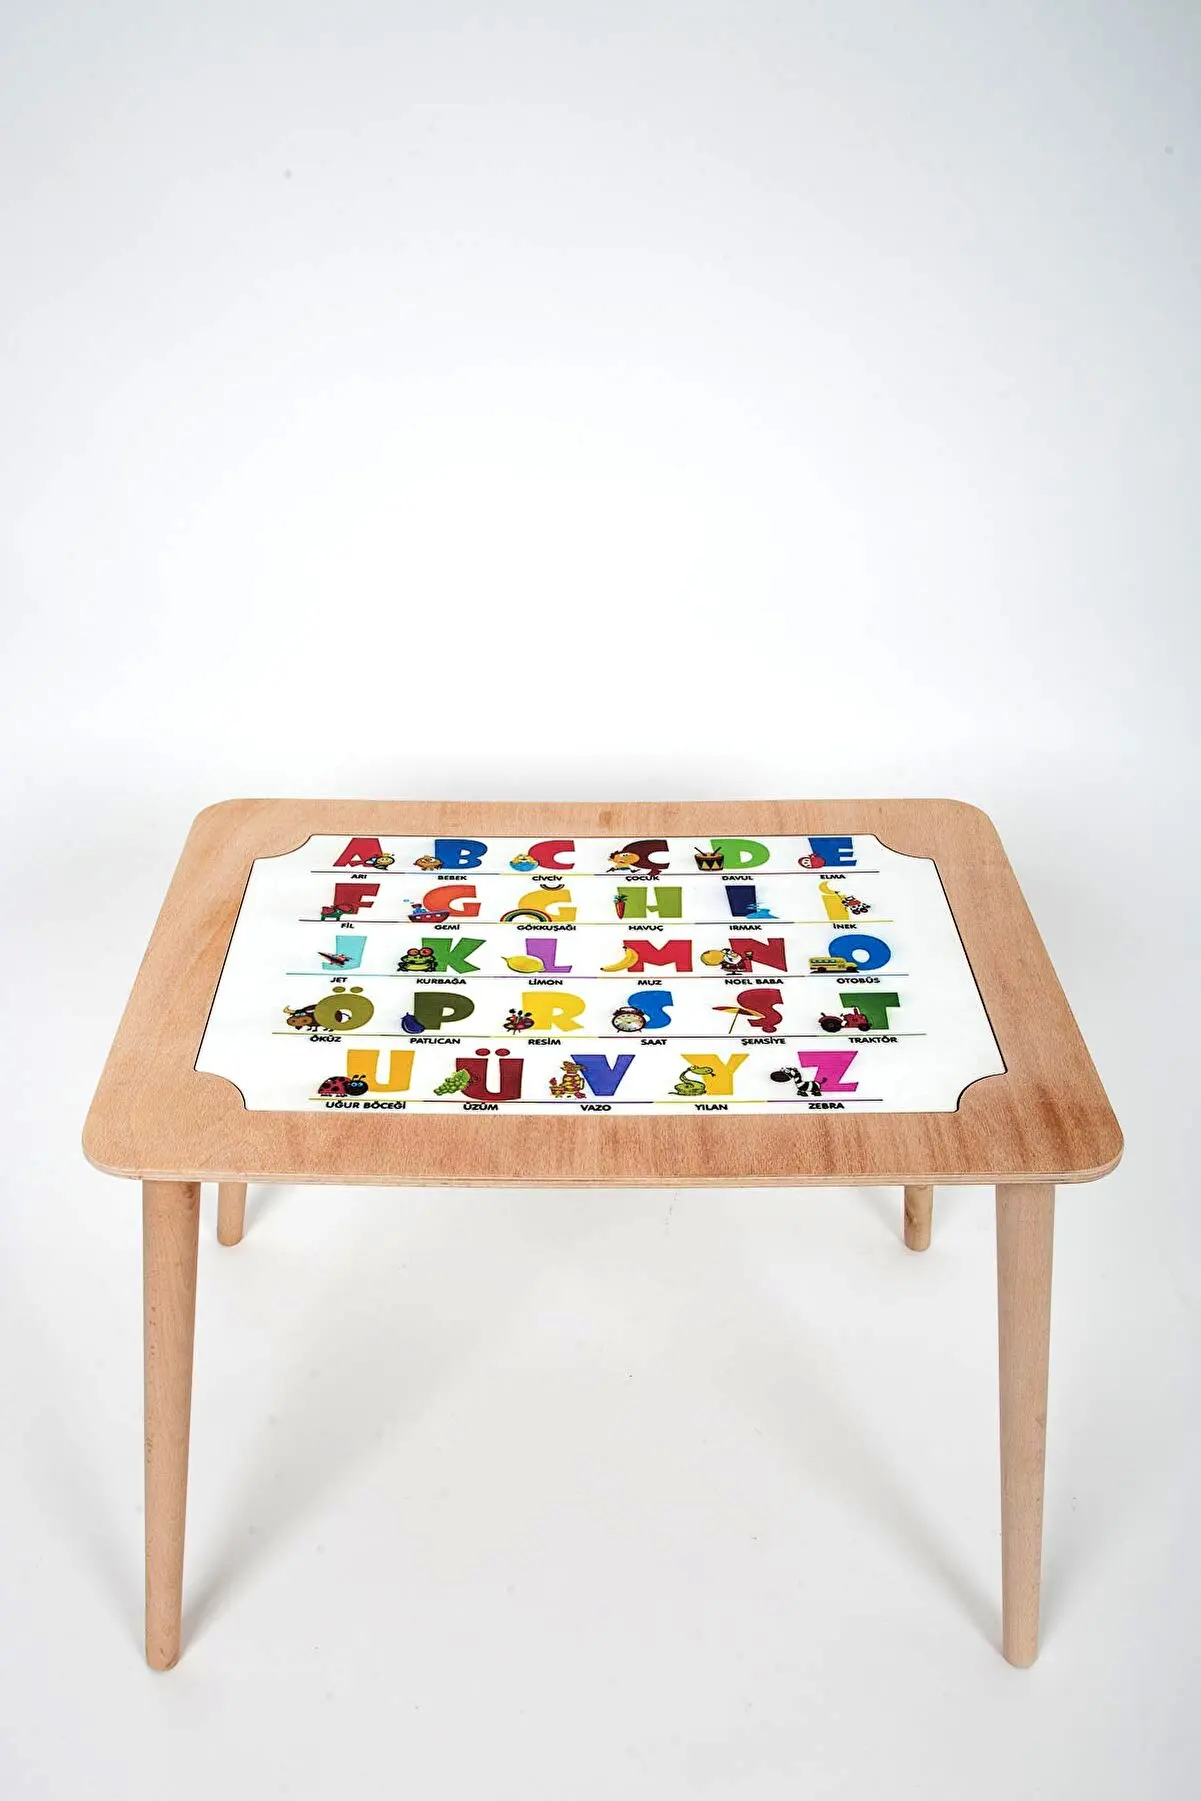 Drawing Desk Toys Kids Painting Board Table And Chair You Education Learning Paint Wooden Abc Educational Kids Activity Desk